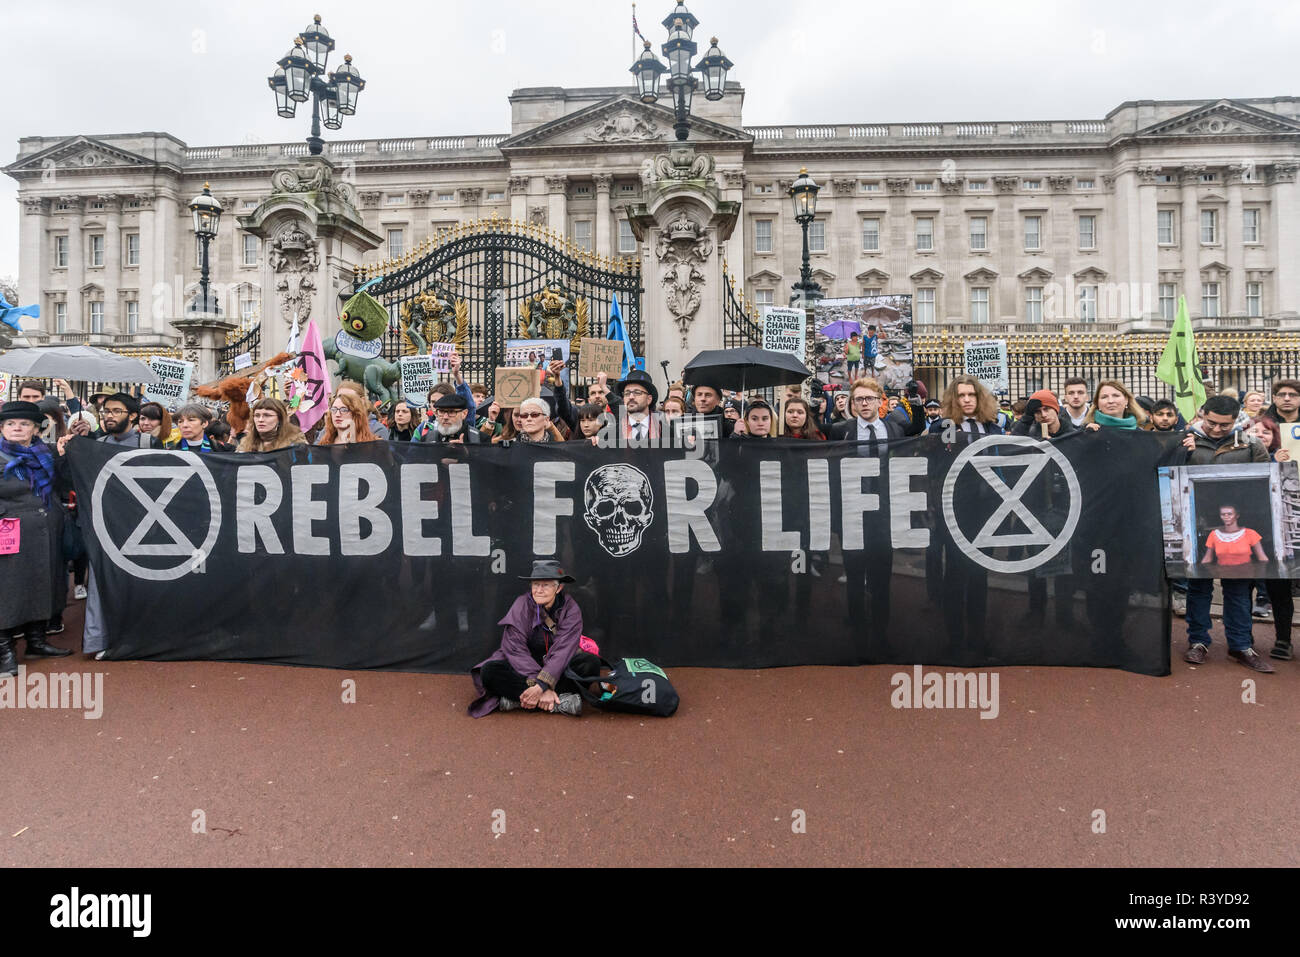 London, UK. 24th November 2018. The Extinction Rebellion funeral procession stands in front of the gates of Buckingham Palace. Gail Bradbrook read a letter from Extinction Rebellion to the Queen, asking her to save her country and the world by insisting the government take urgent climate action and press other governments to also do so, and the campaigners repeated the rebellion declaration once more. People then came to lay their wreaths, flowers, and other things they had brought on the coffin in silence, after which there was music and dance and I left. Peter Marshall/Alamy Live News Stock Photo